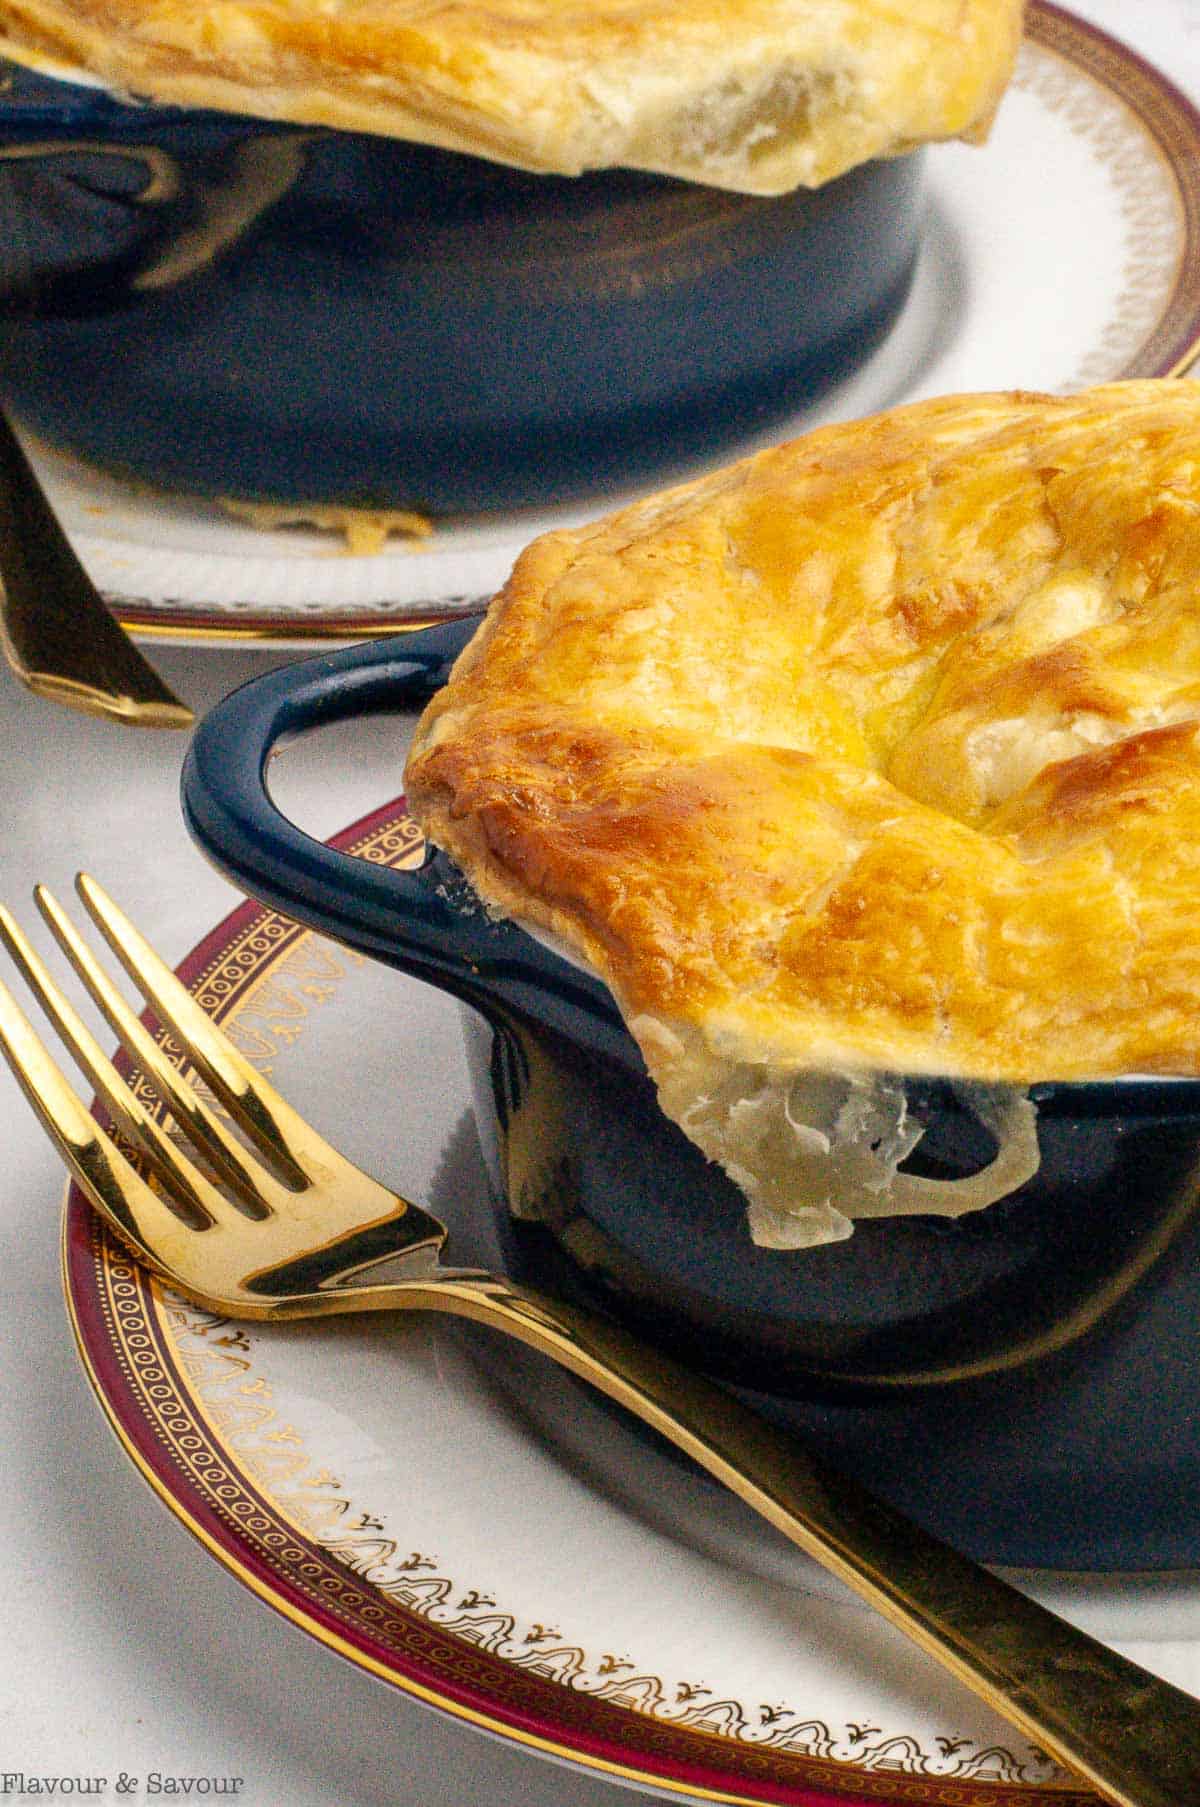 2 cocottes of seafood pot pie topped with puff pastry